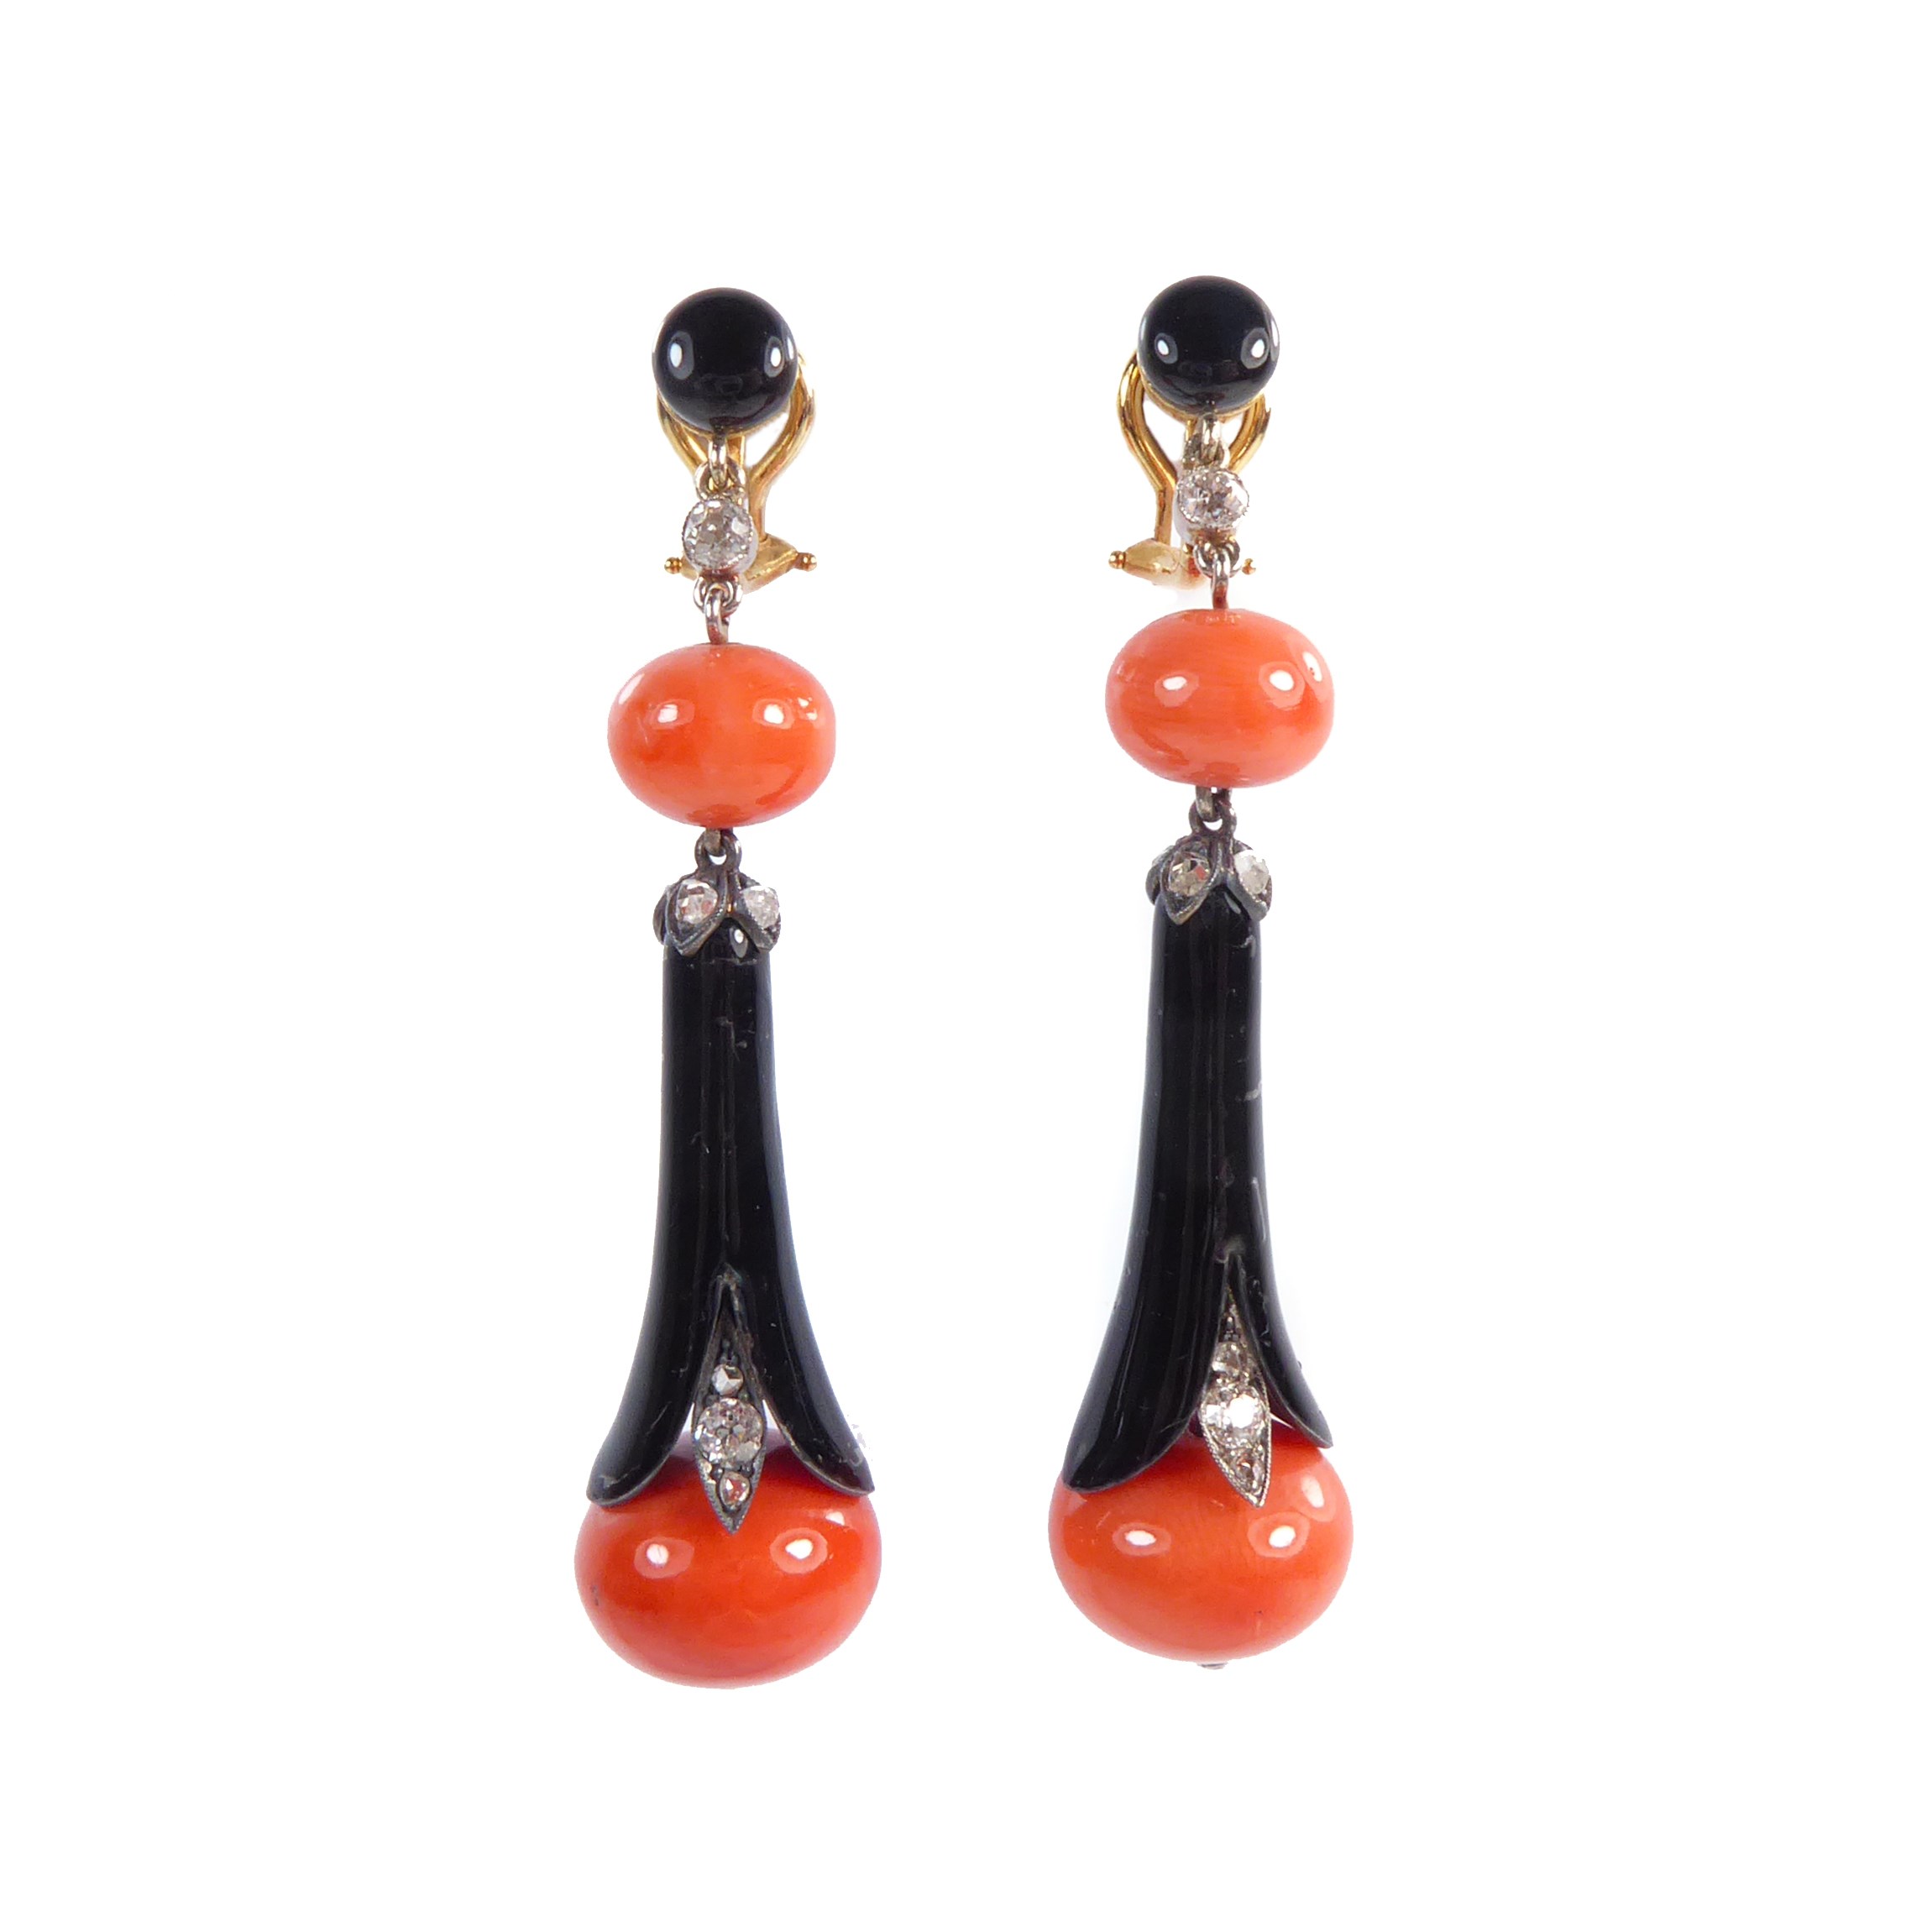 A PAIR OF ART DECO CORAL, DIAMOND, AND ENAMEL EARRINGS, CIRCA 1925. | Art  deco jewelry, Art deco earrings, Deco jewelry